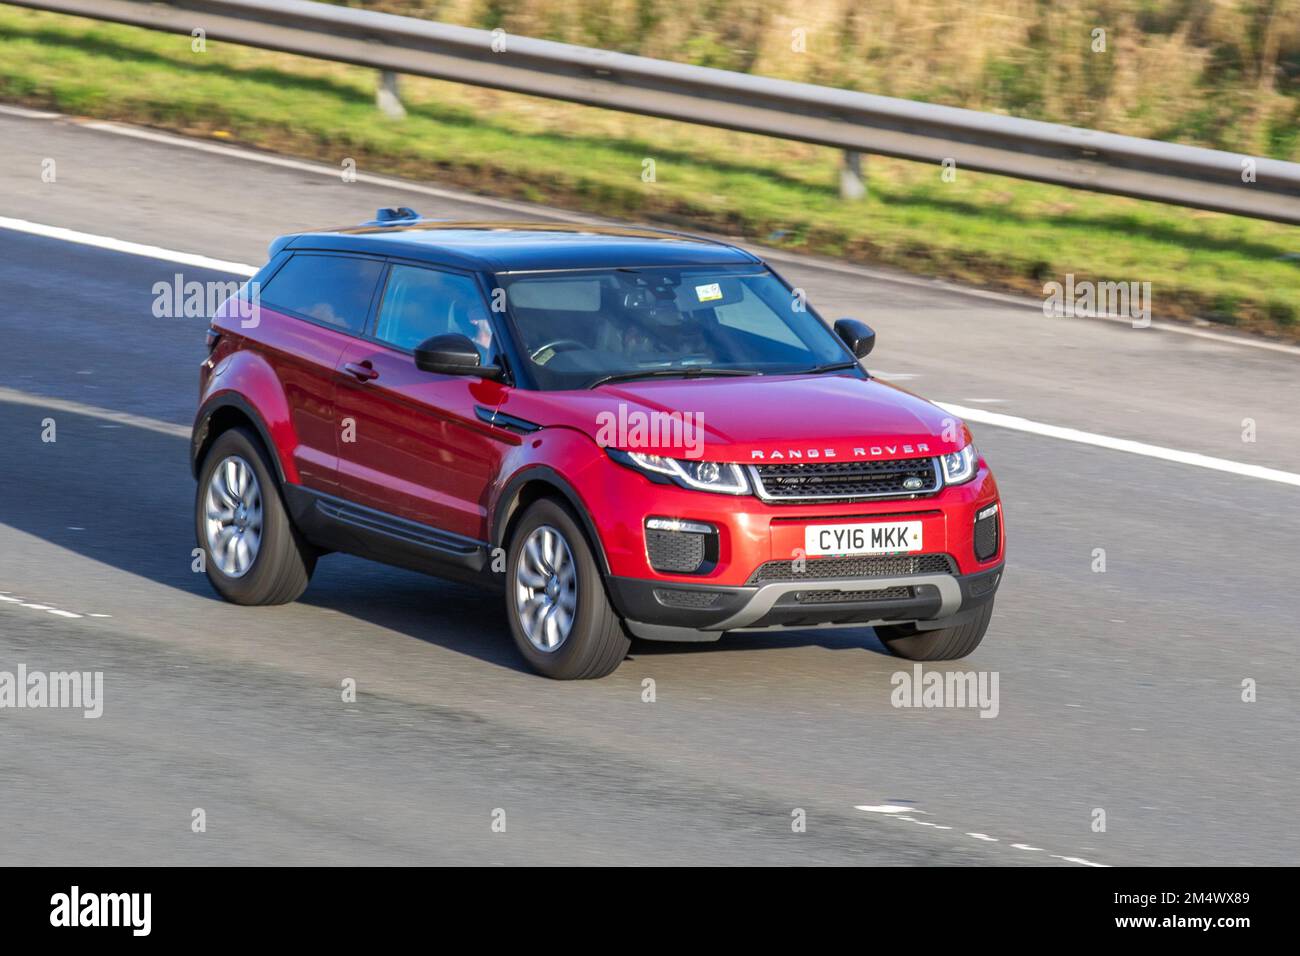 2016 Red LAND ROVER, RANGE ROVER EVOQUE TD4 HSE DYNAMIC 1999 cc Diesel 9 speed automatic SUV; travelling on the M6 motorway UK Stock Photo